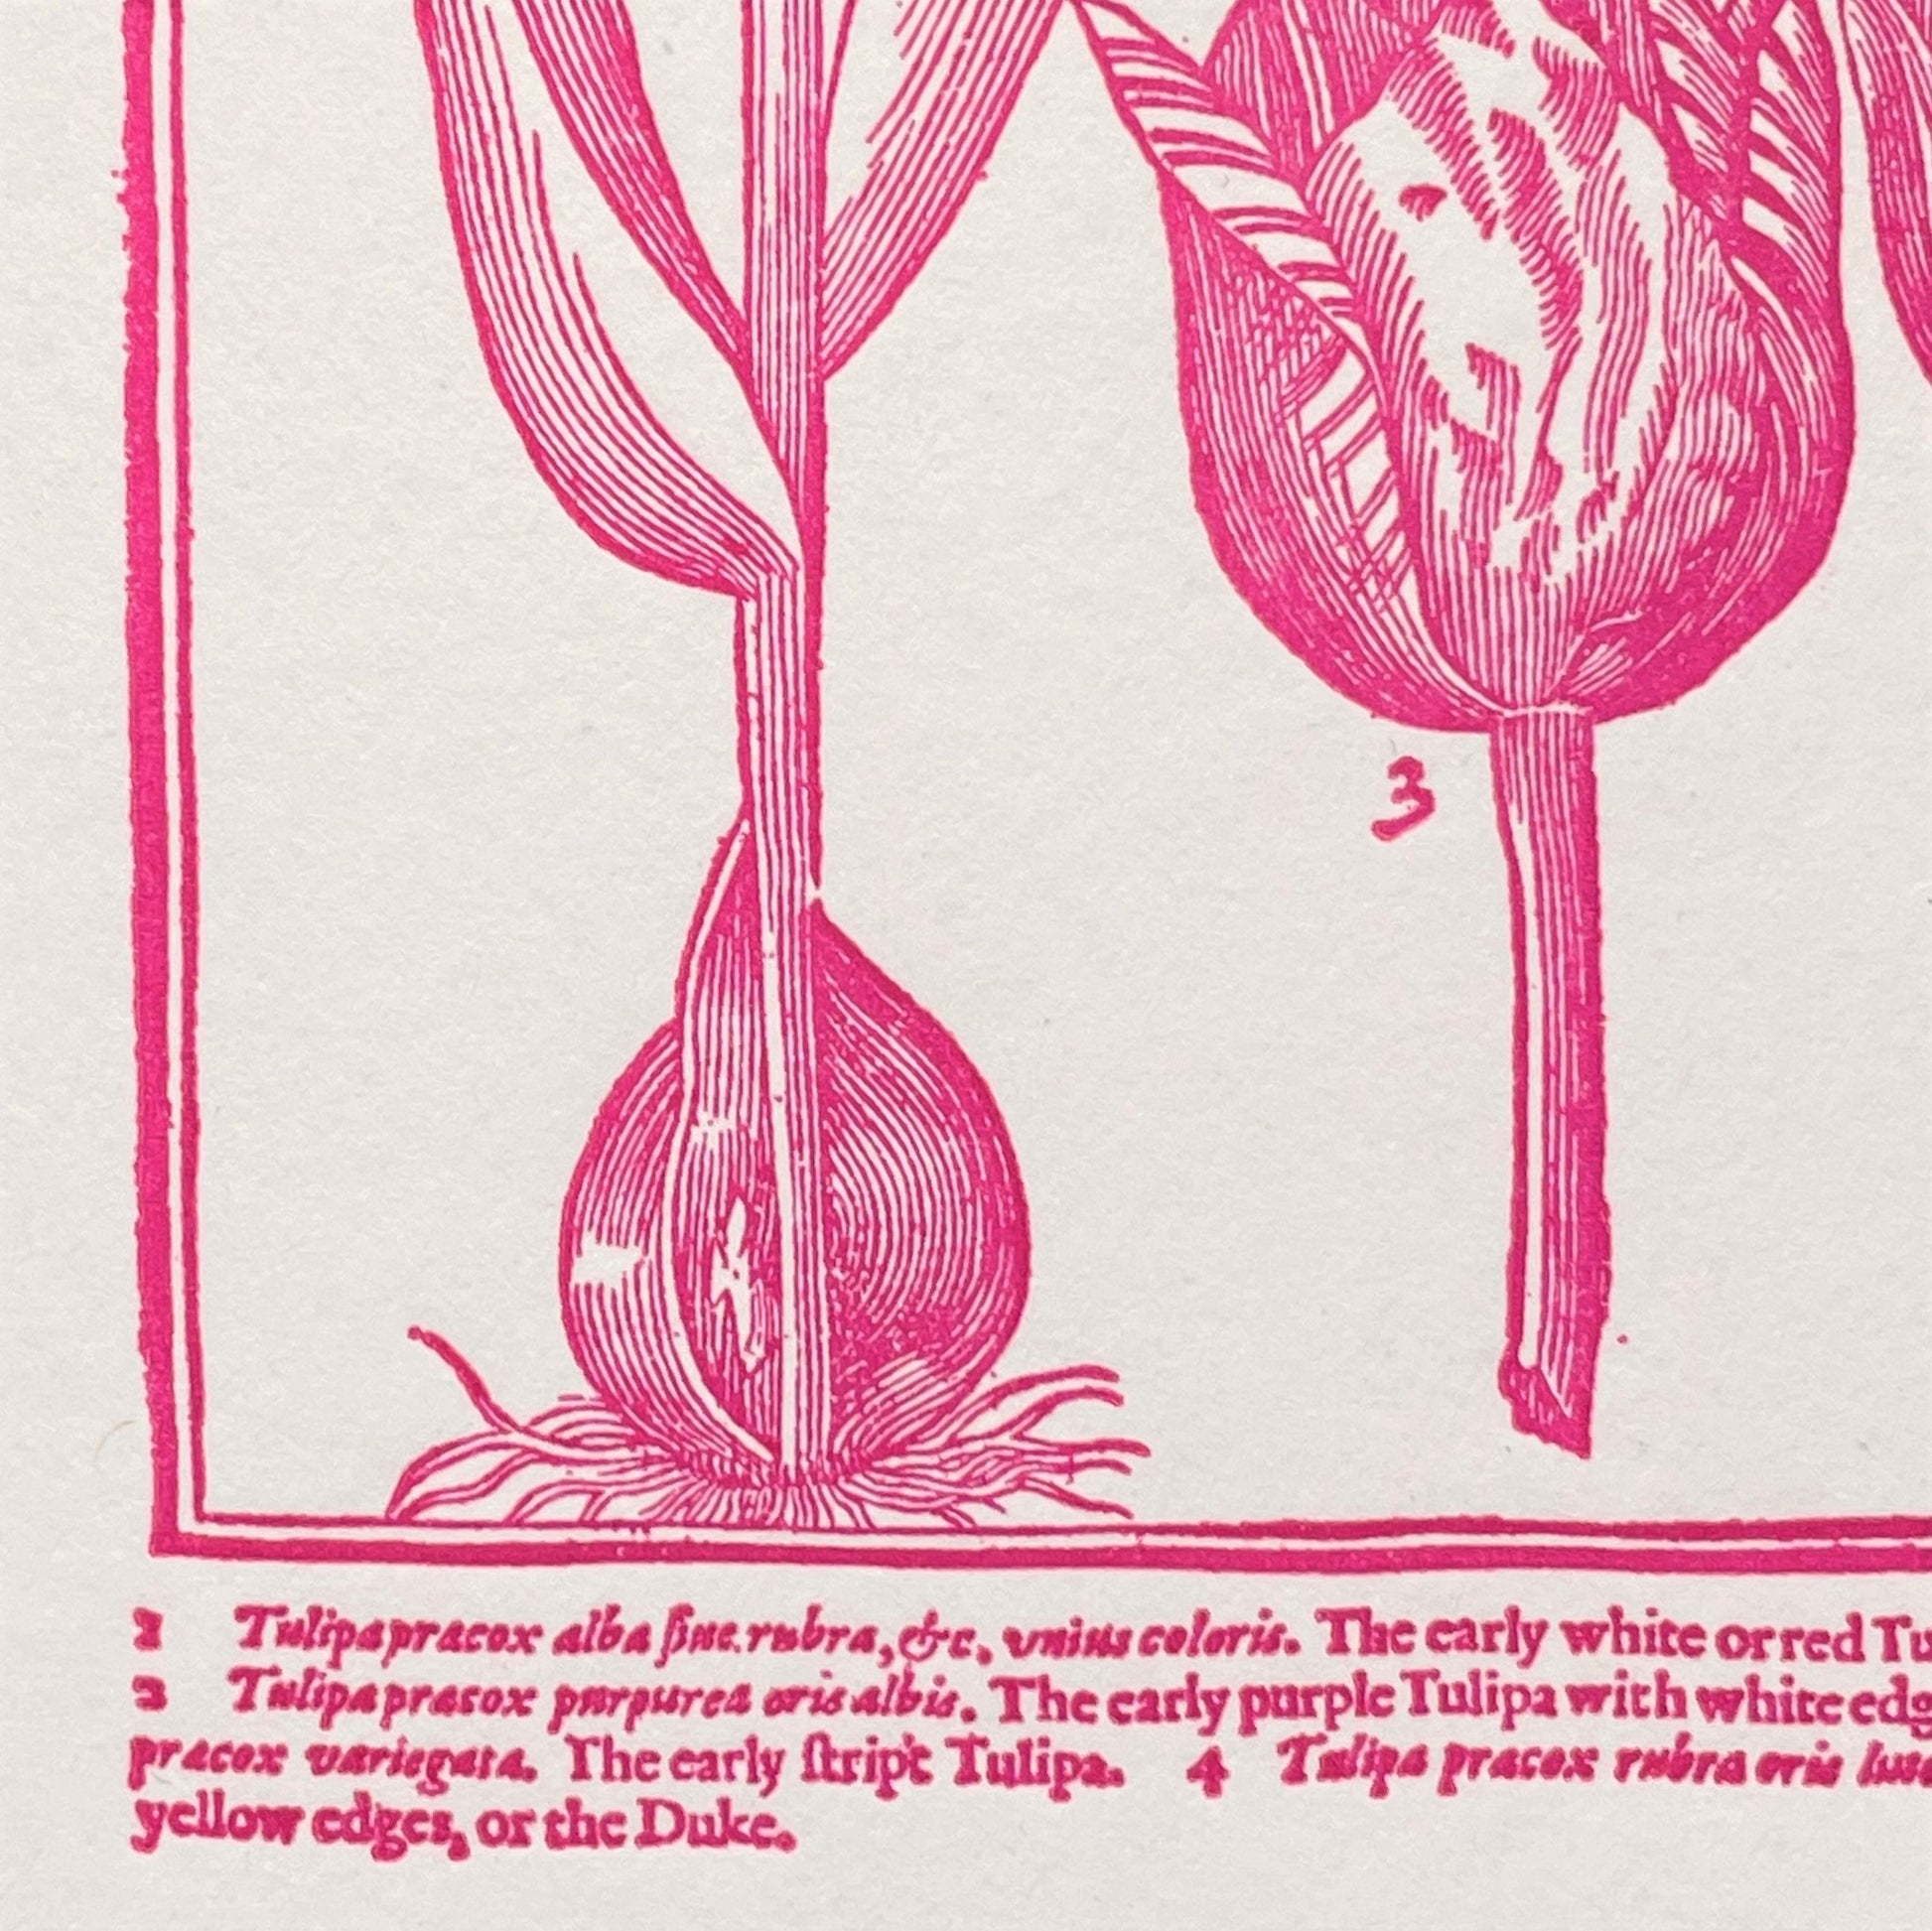 letterpress greetings card of a drawing of different tulips, pink ink on white, close-up